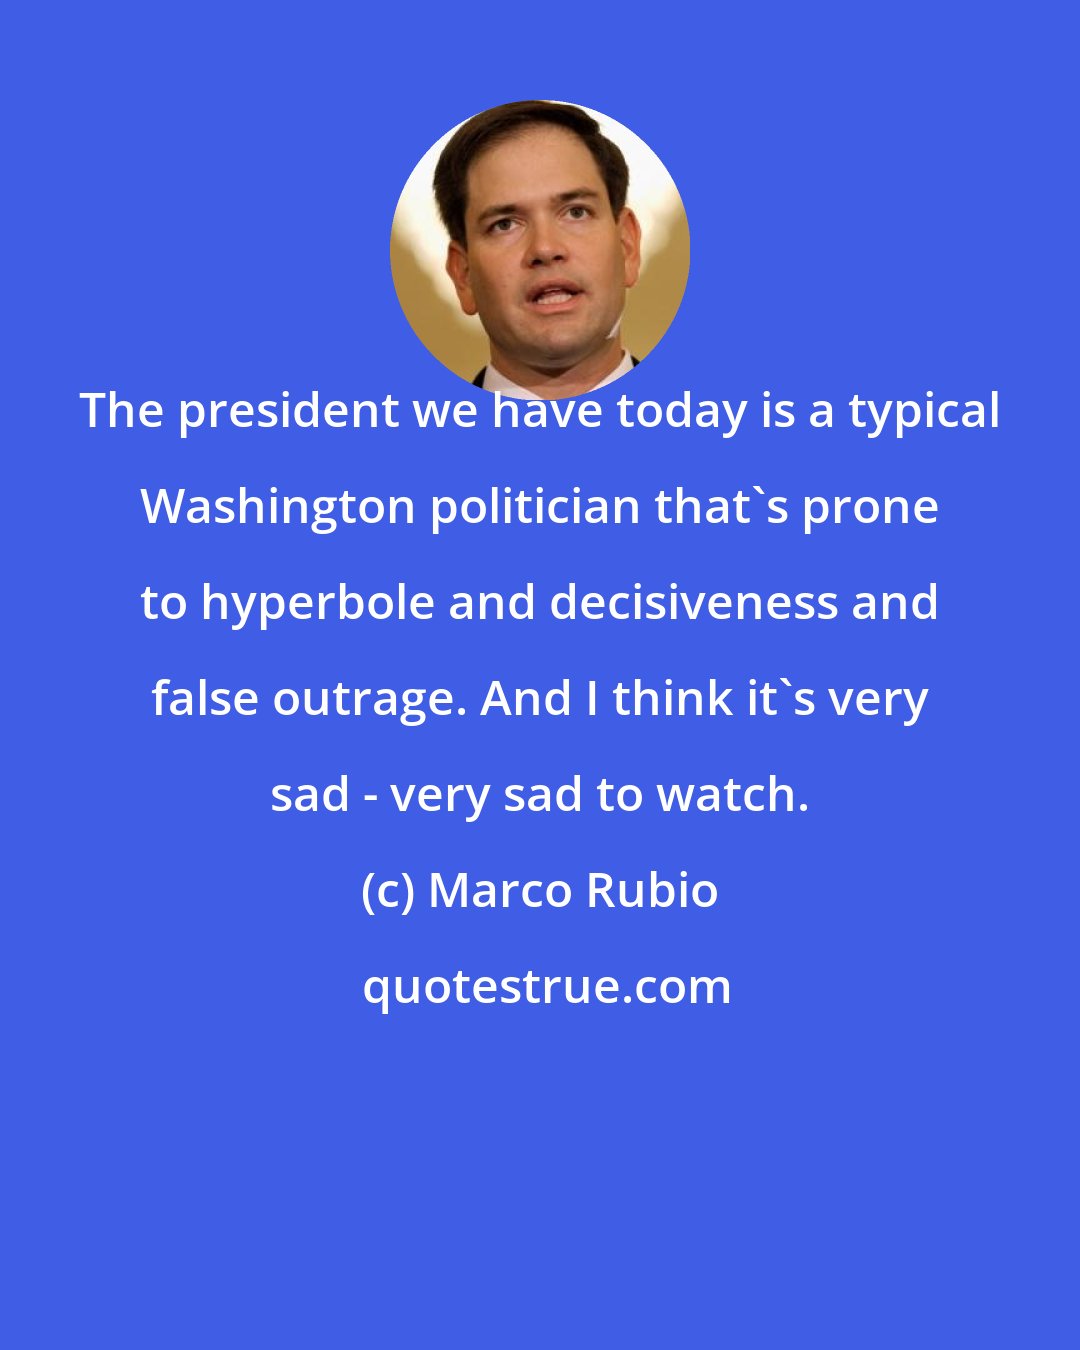 Marco Rubio: The president we have today is a typical Washington politician that's prone to hyperbole and decisiveness and false outrage. And I think it's very sad - very sad to watch.